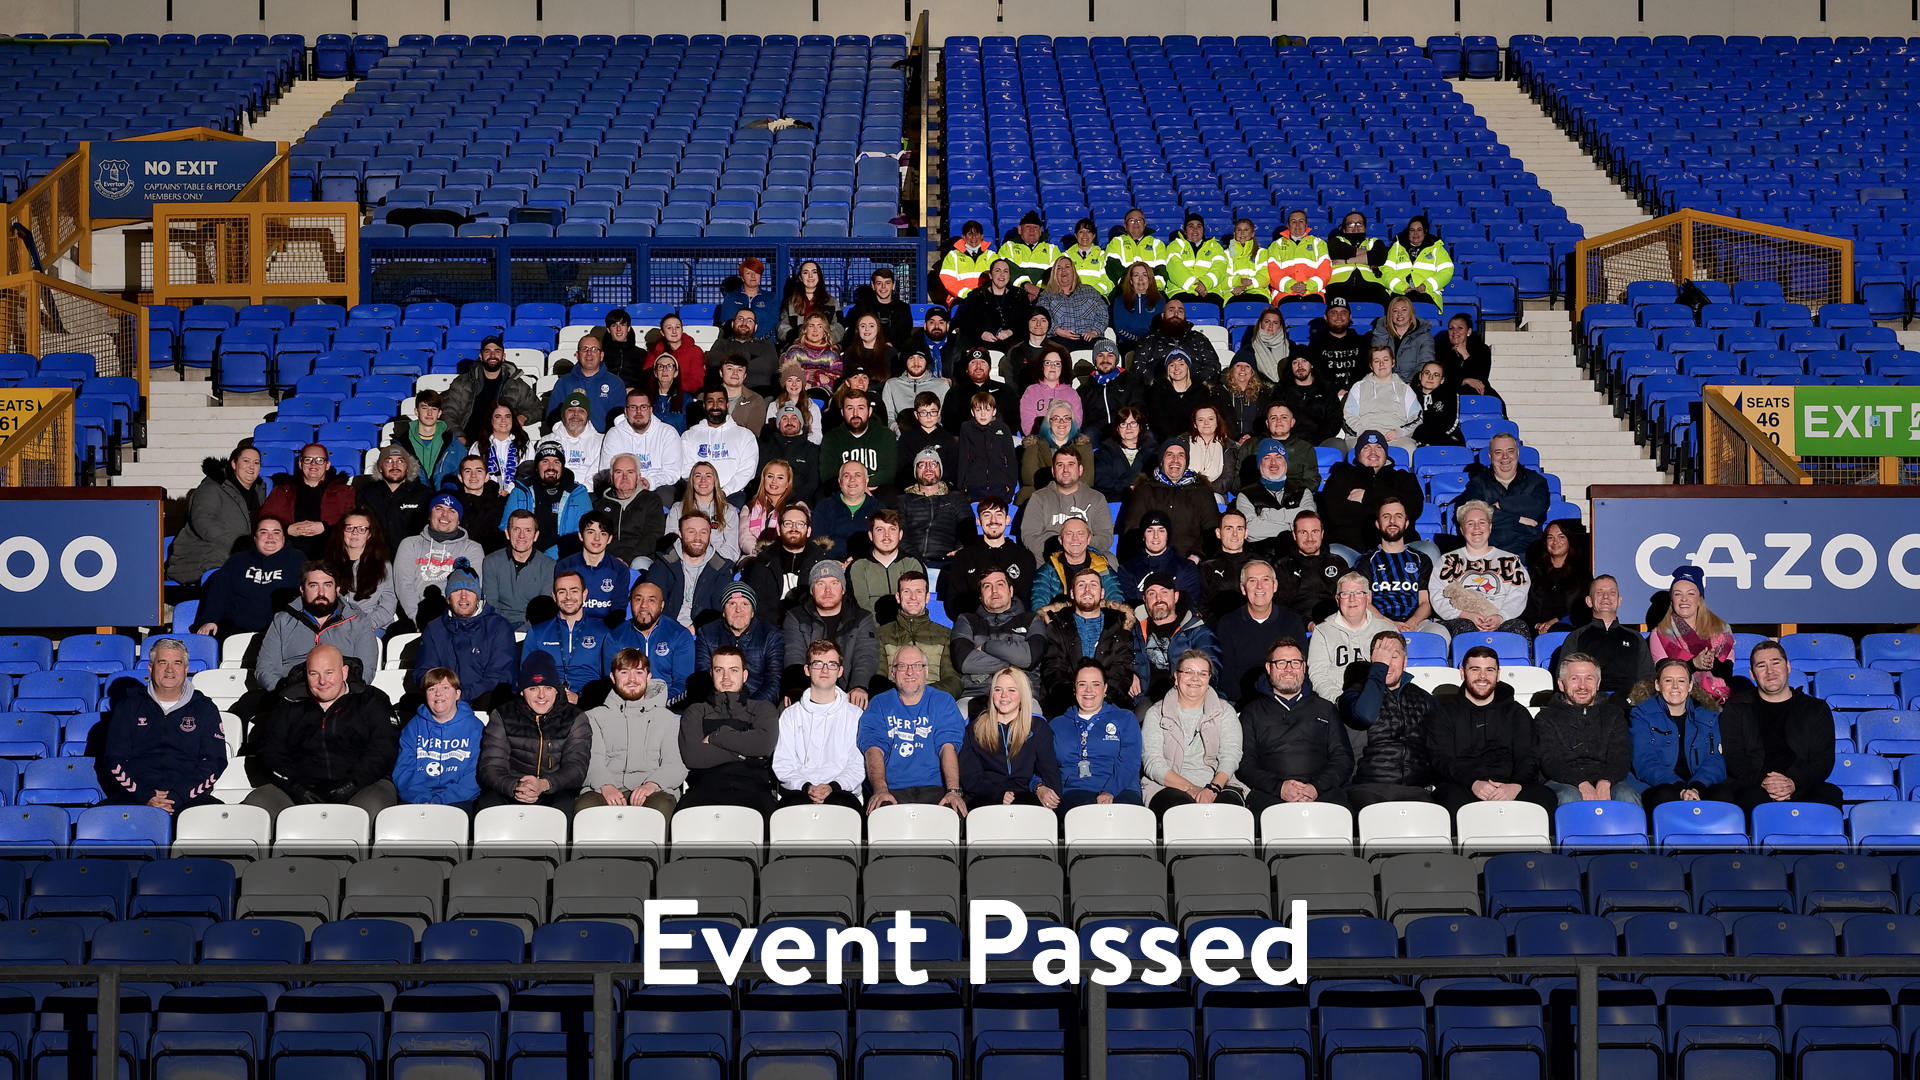 Make More Memories At Goodison With Annual Sleepout